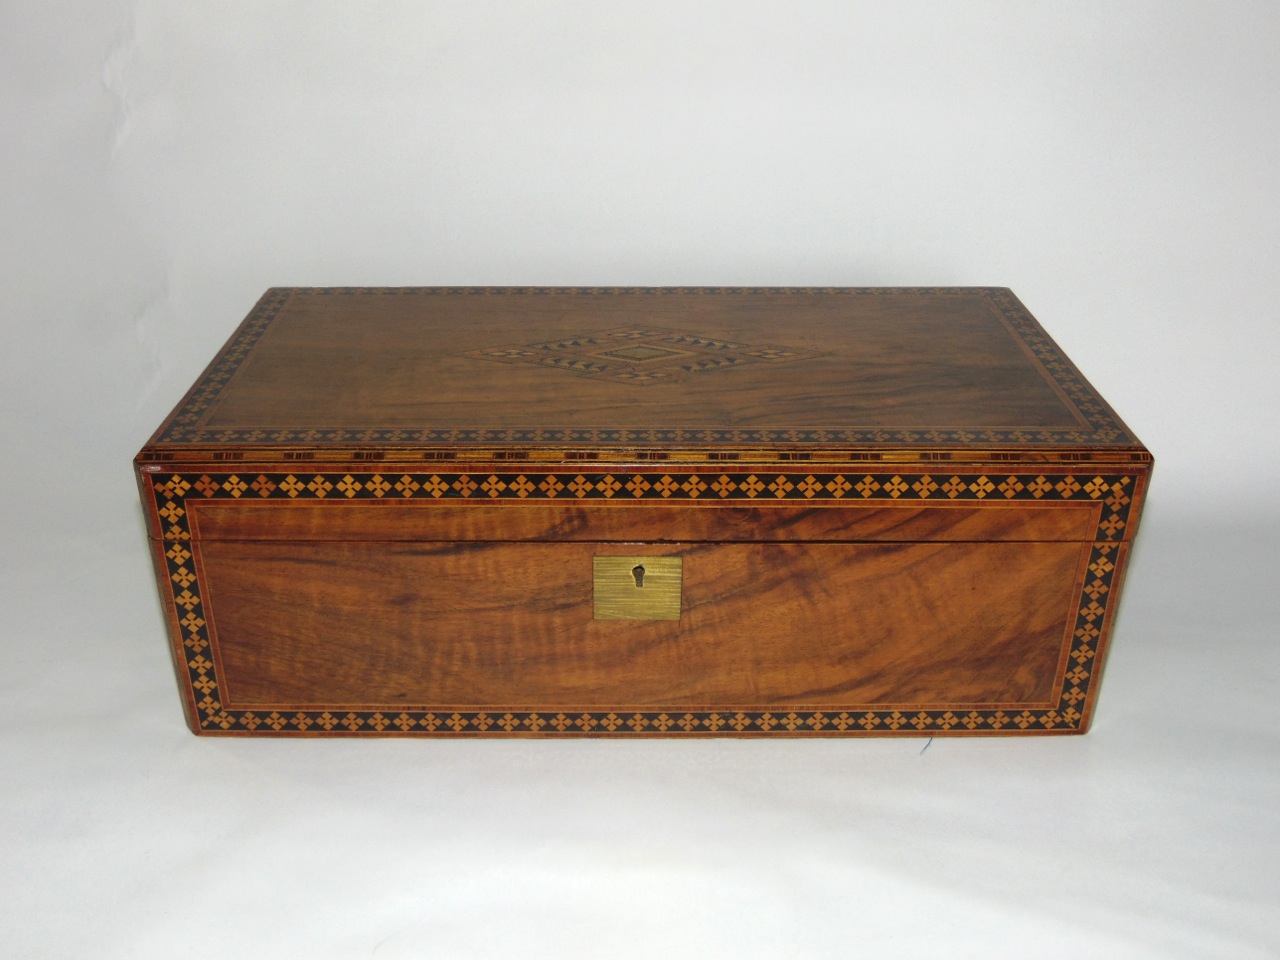 A substantial Victorian walnut and straw work marquetry laptop desk with fitted interior